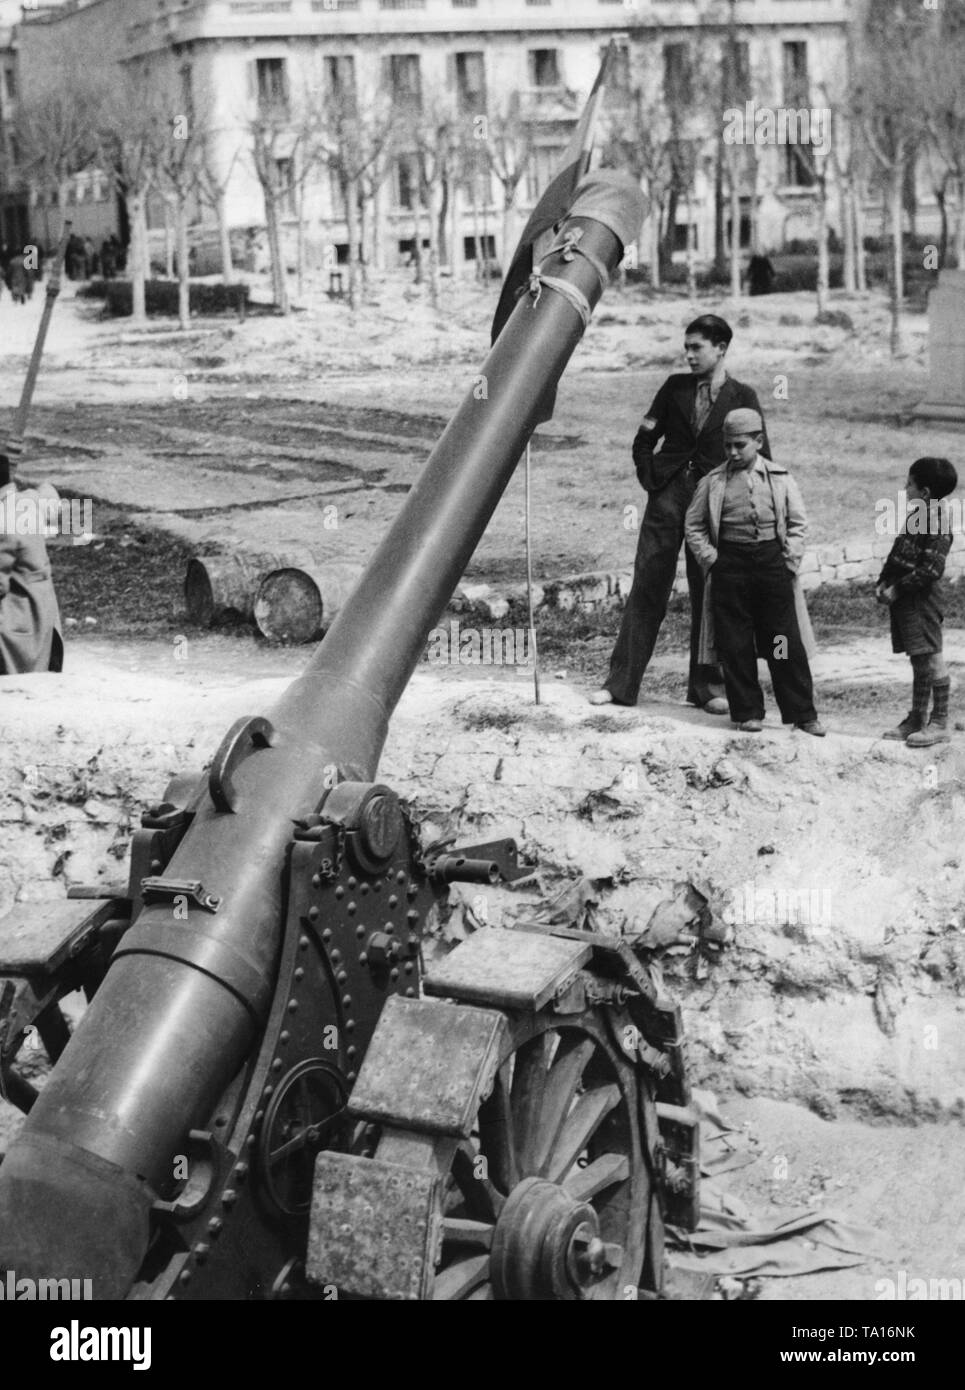 Photo of a Republican artillery gun after the entry of the Spanish national faction into the Spanish capital in the spring of 1939. The barrel is decorated with the Spanish Bandera, the national flag. Behind, there are children. Stock Photo